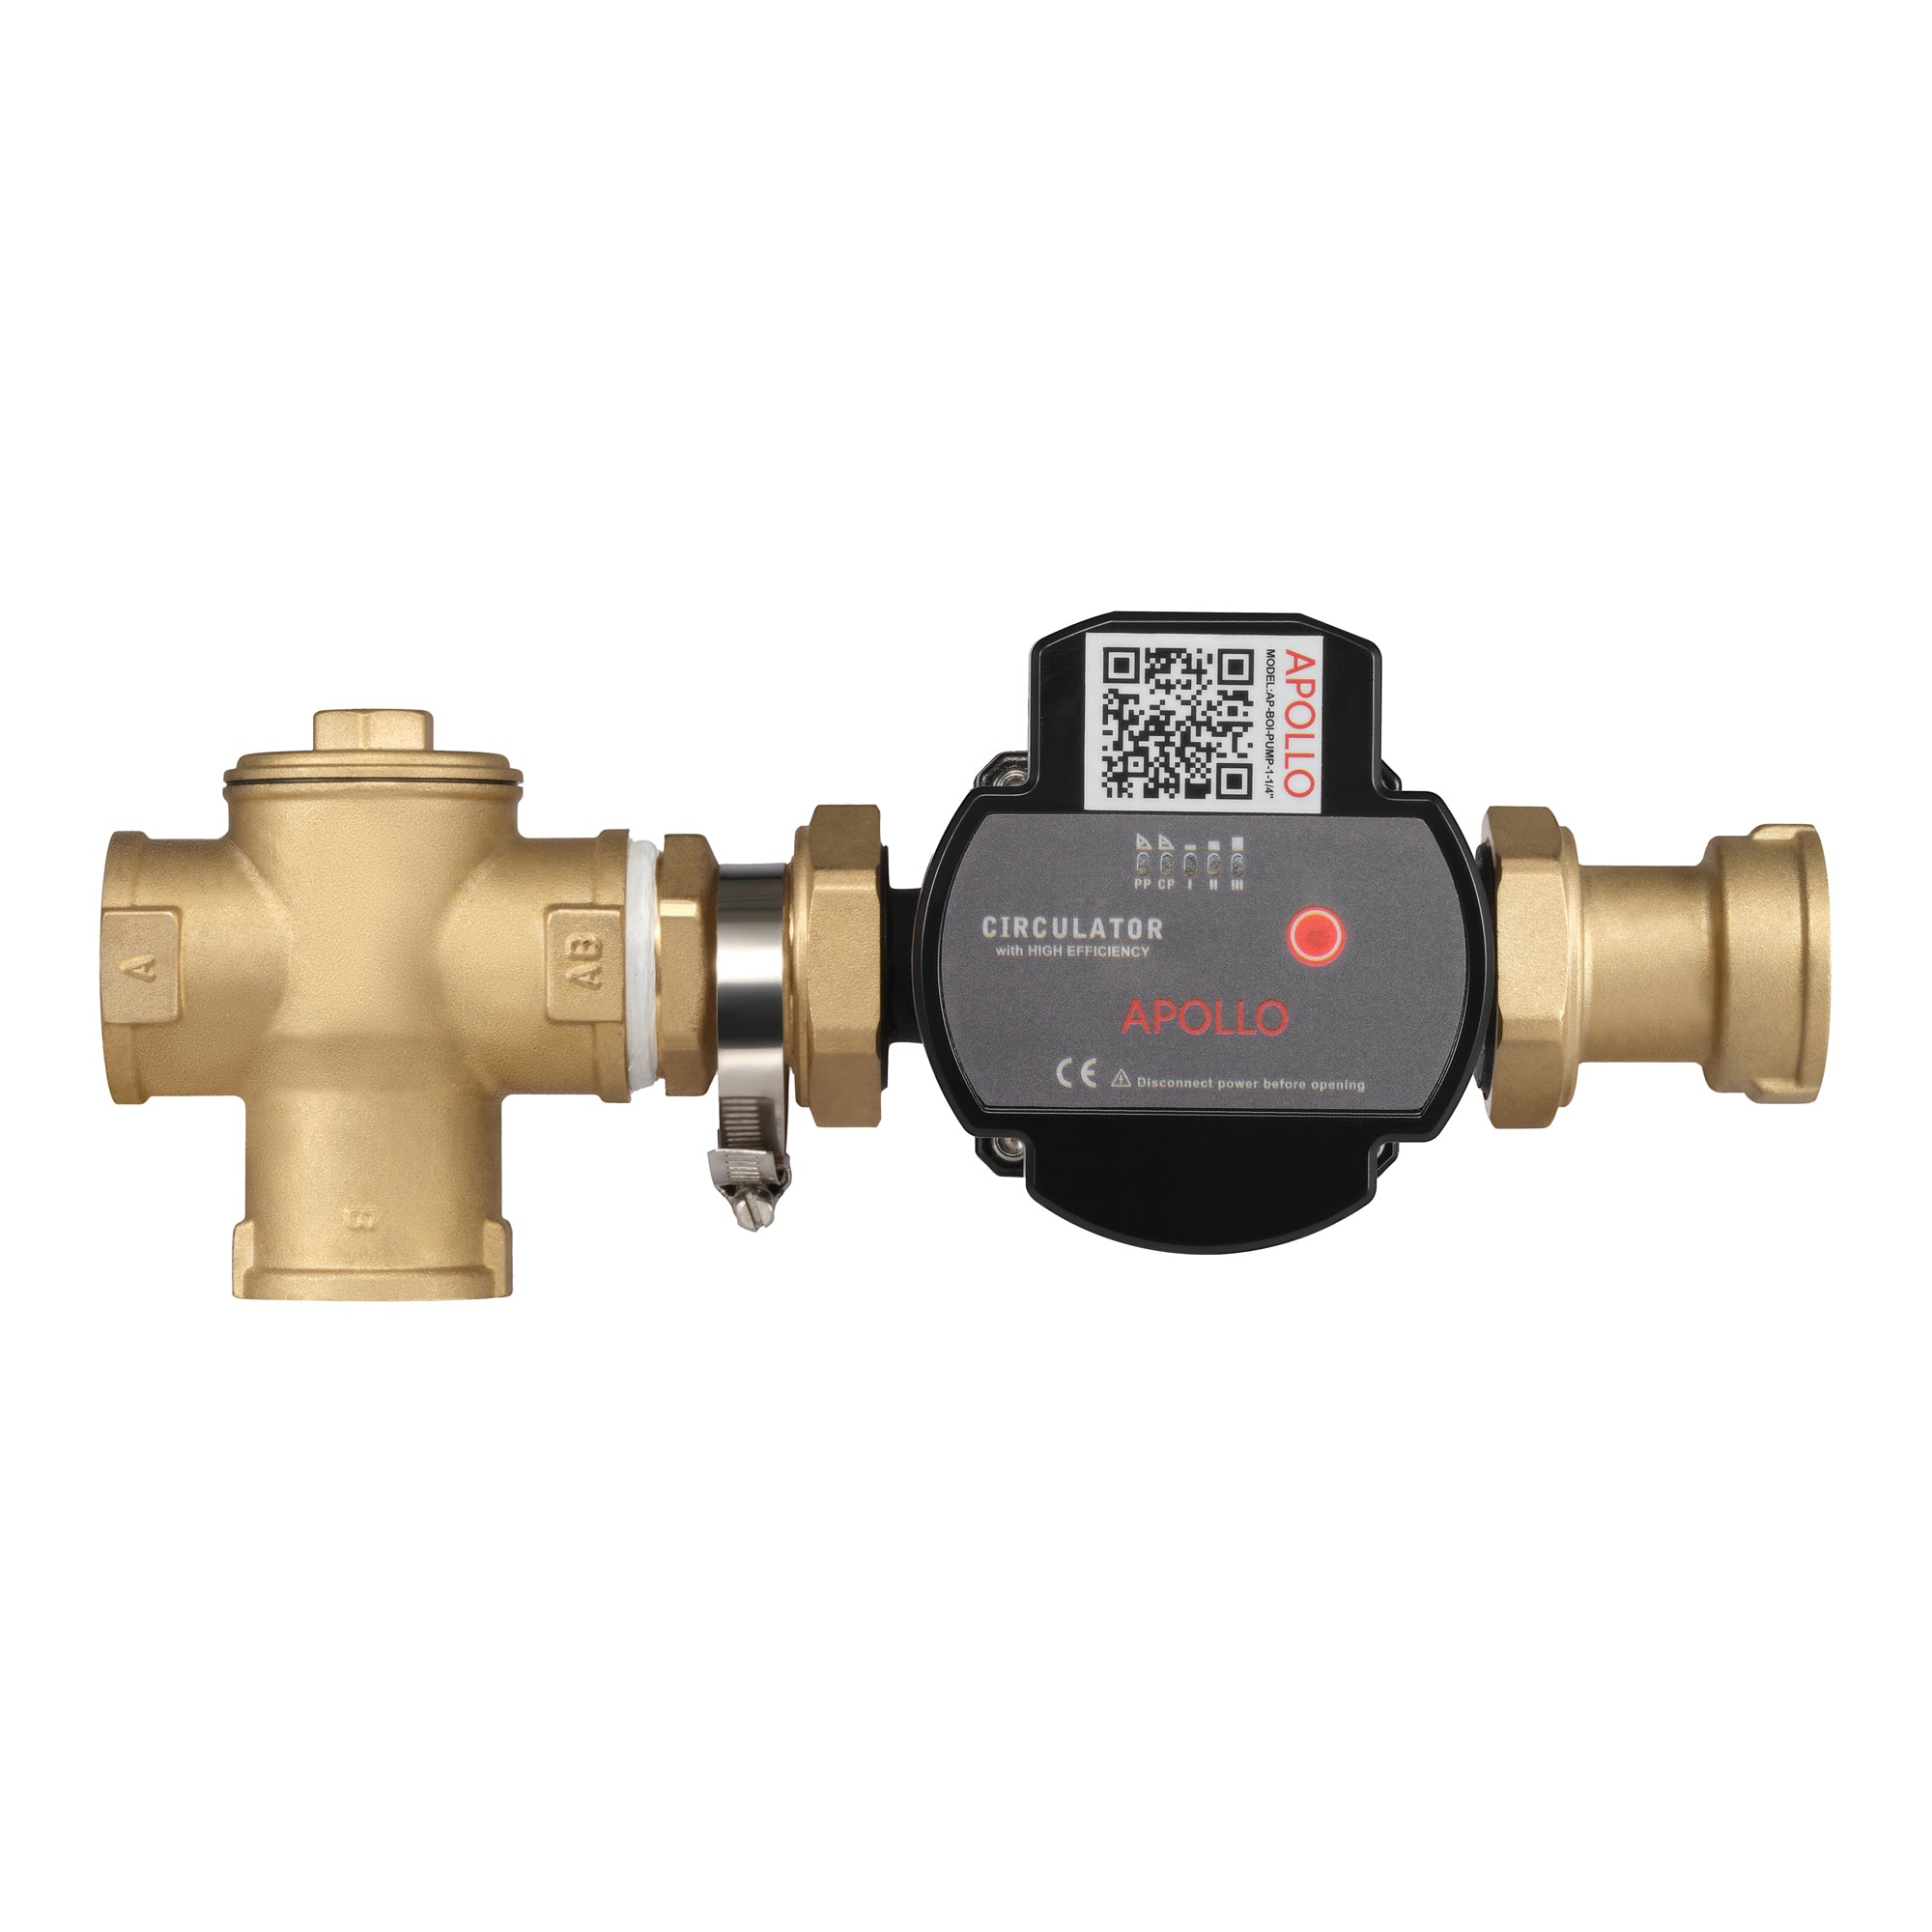 Boiler Station - All in one: protection valve, pump and thermometer